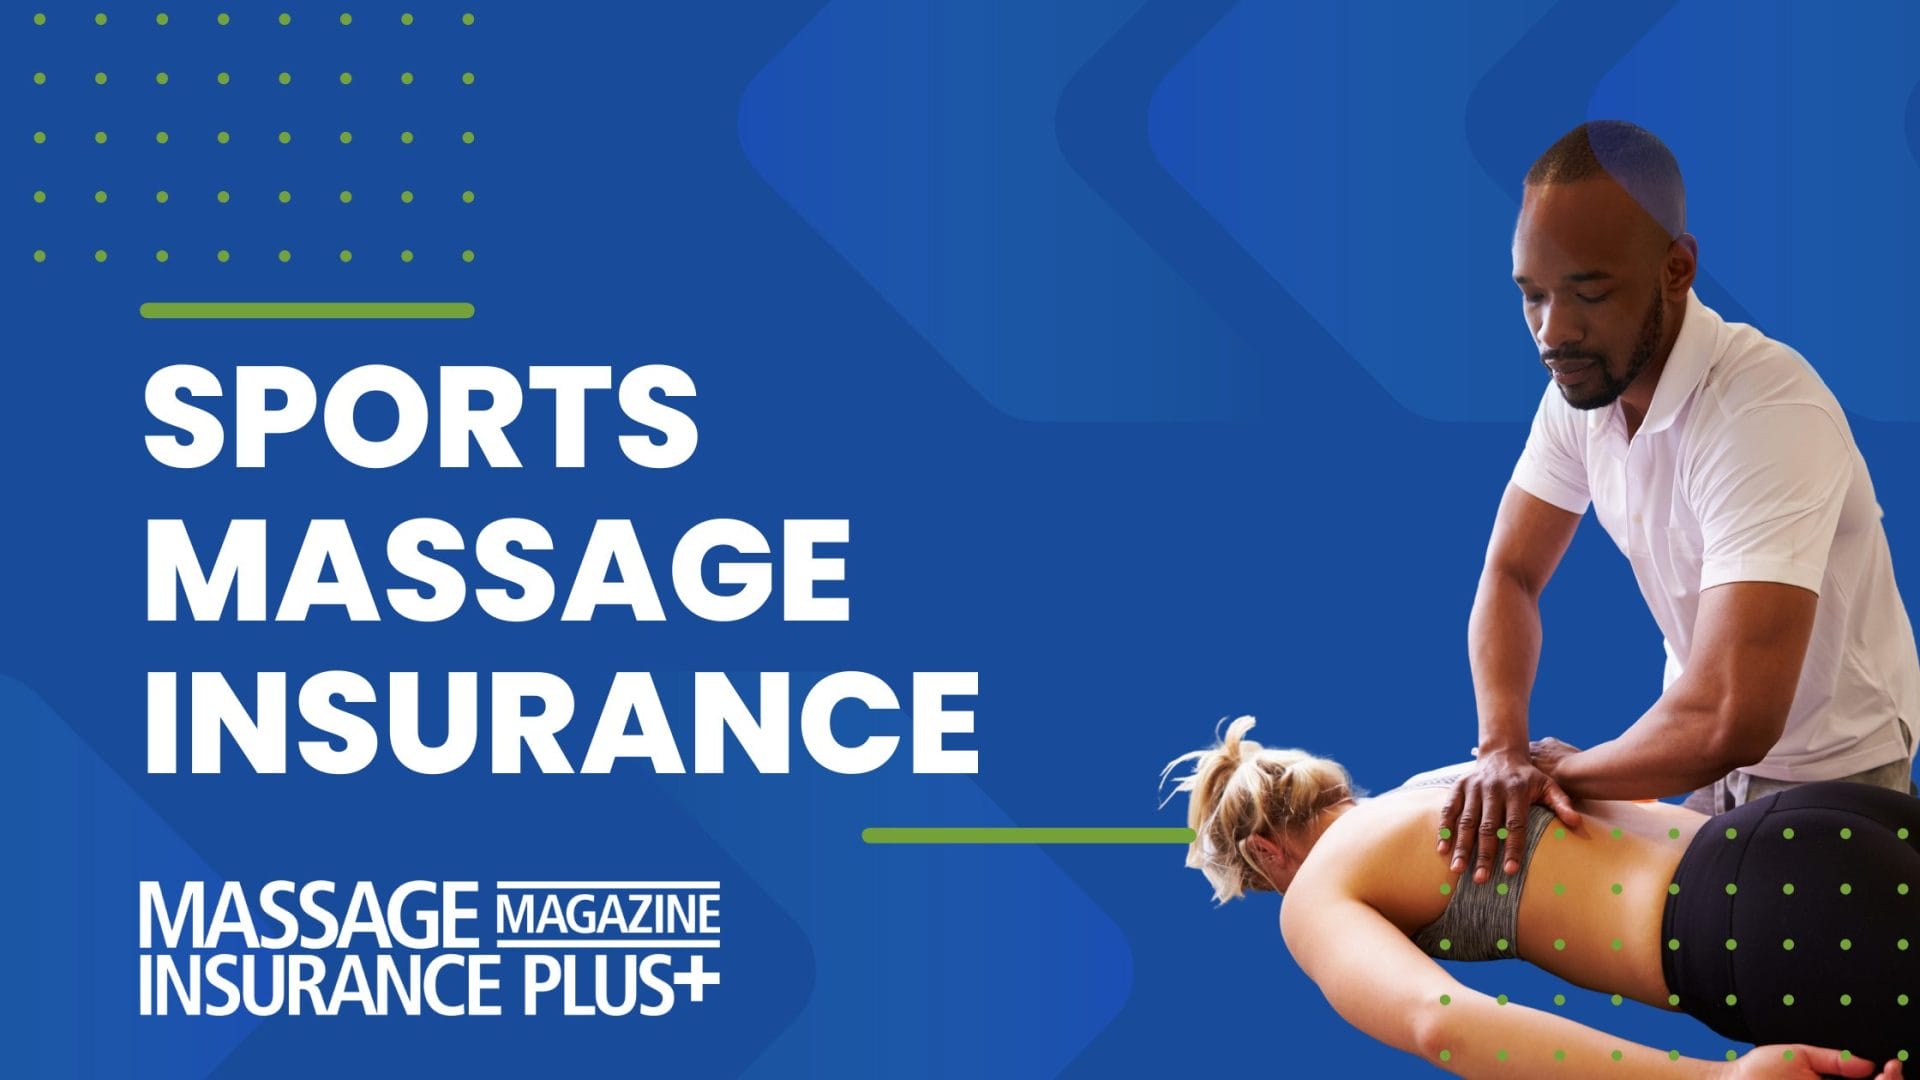 featured image Sports Massage  Therapy Insurance.. A sports massage therapist giving a massage thinking about liability insurance